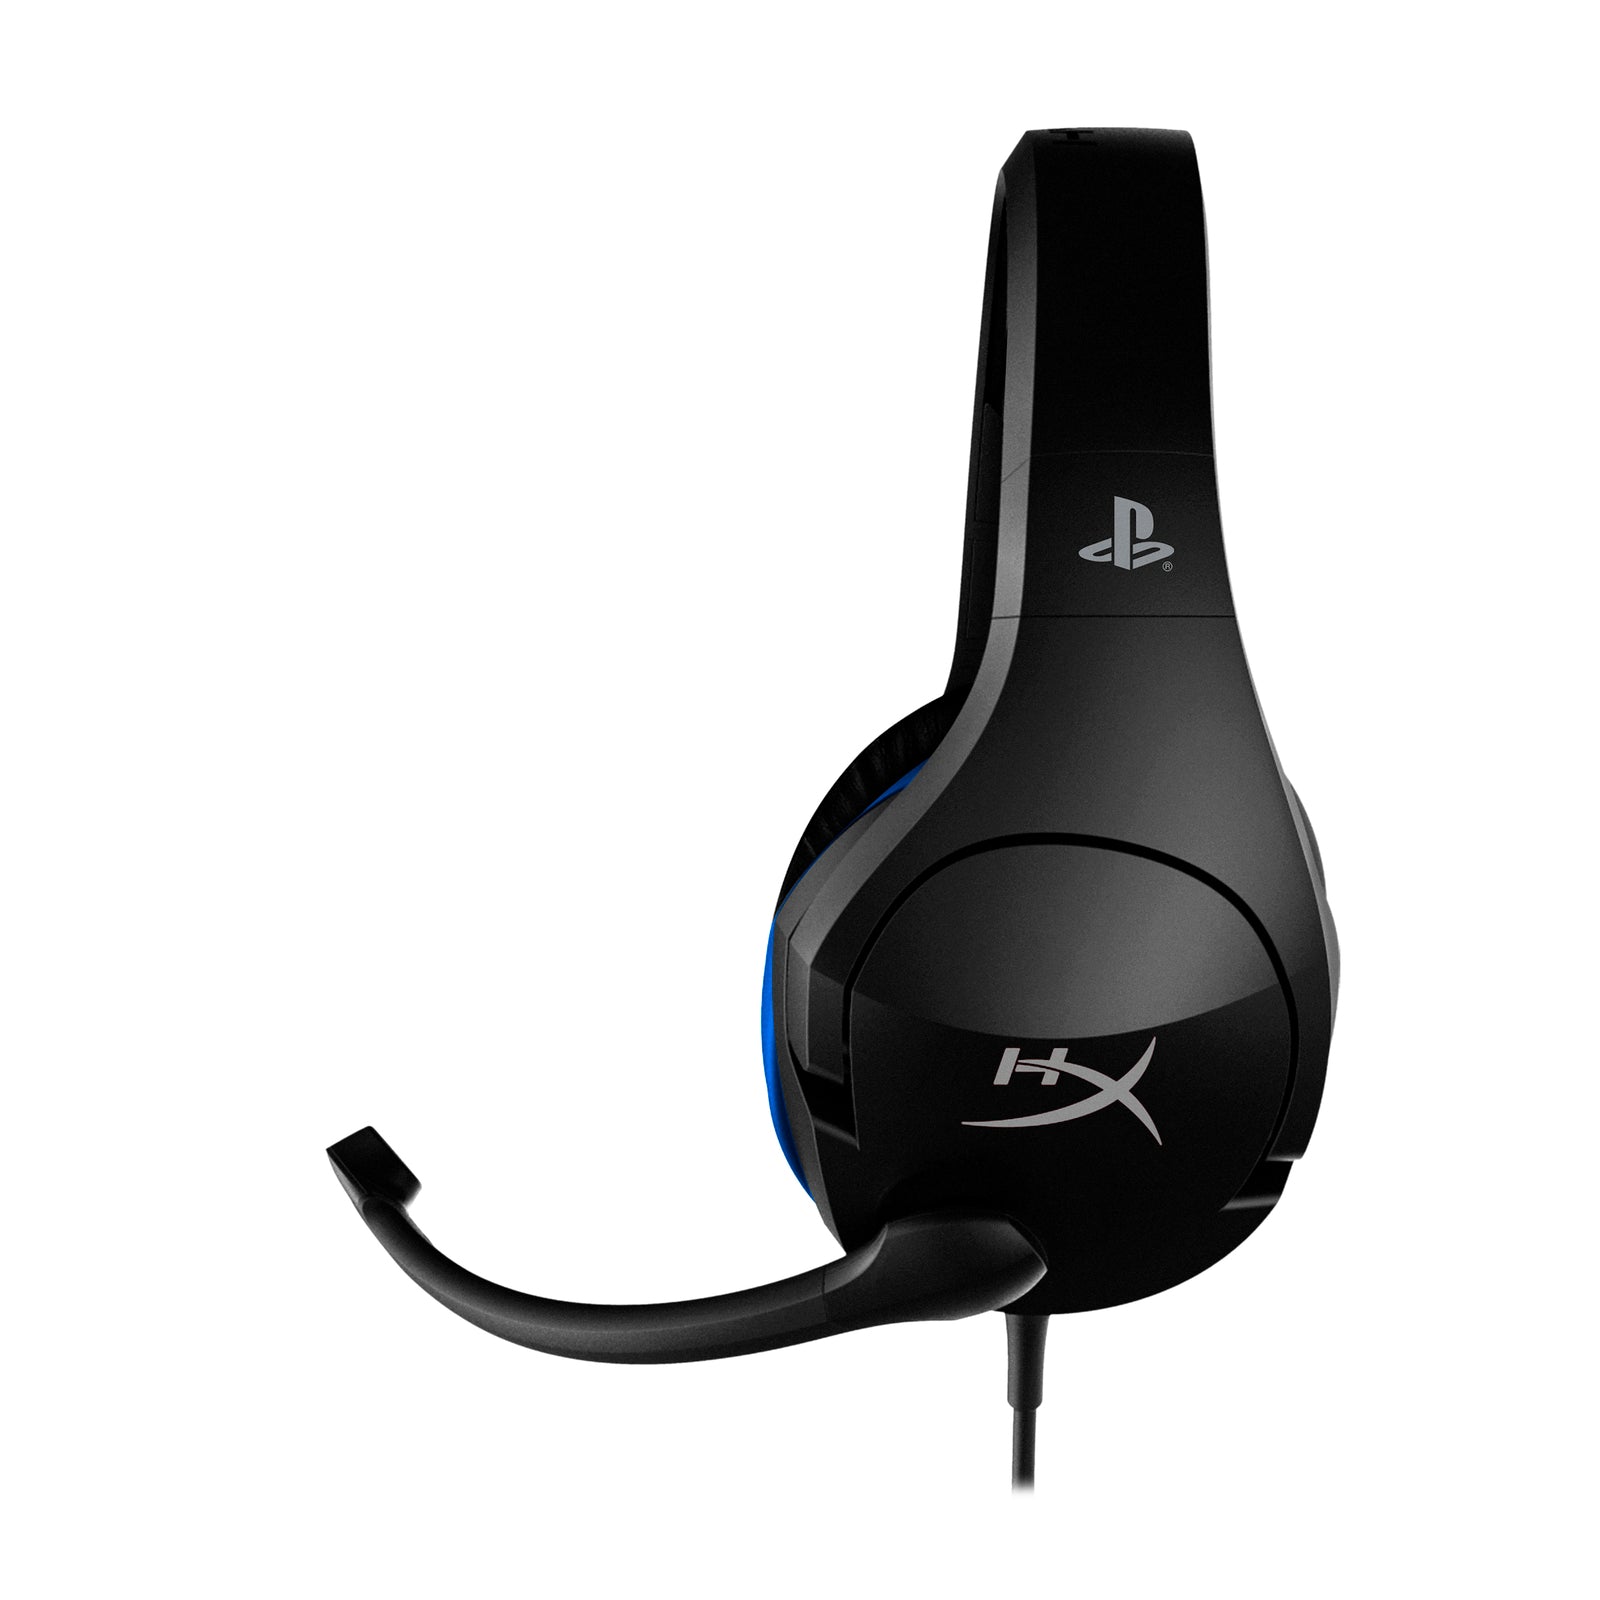 Cloud Stinger - Comfortable Gaming Headset for and PS4 HyperX